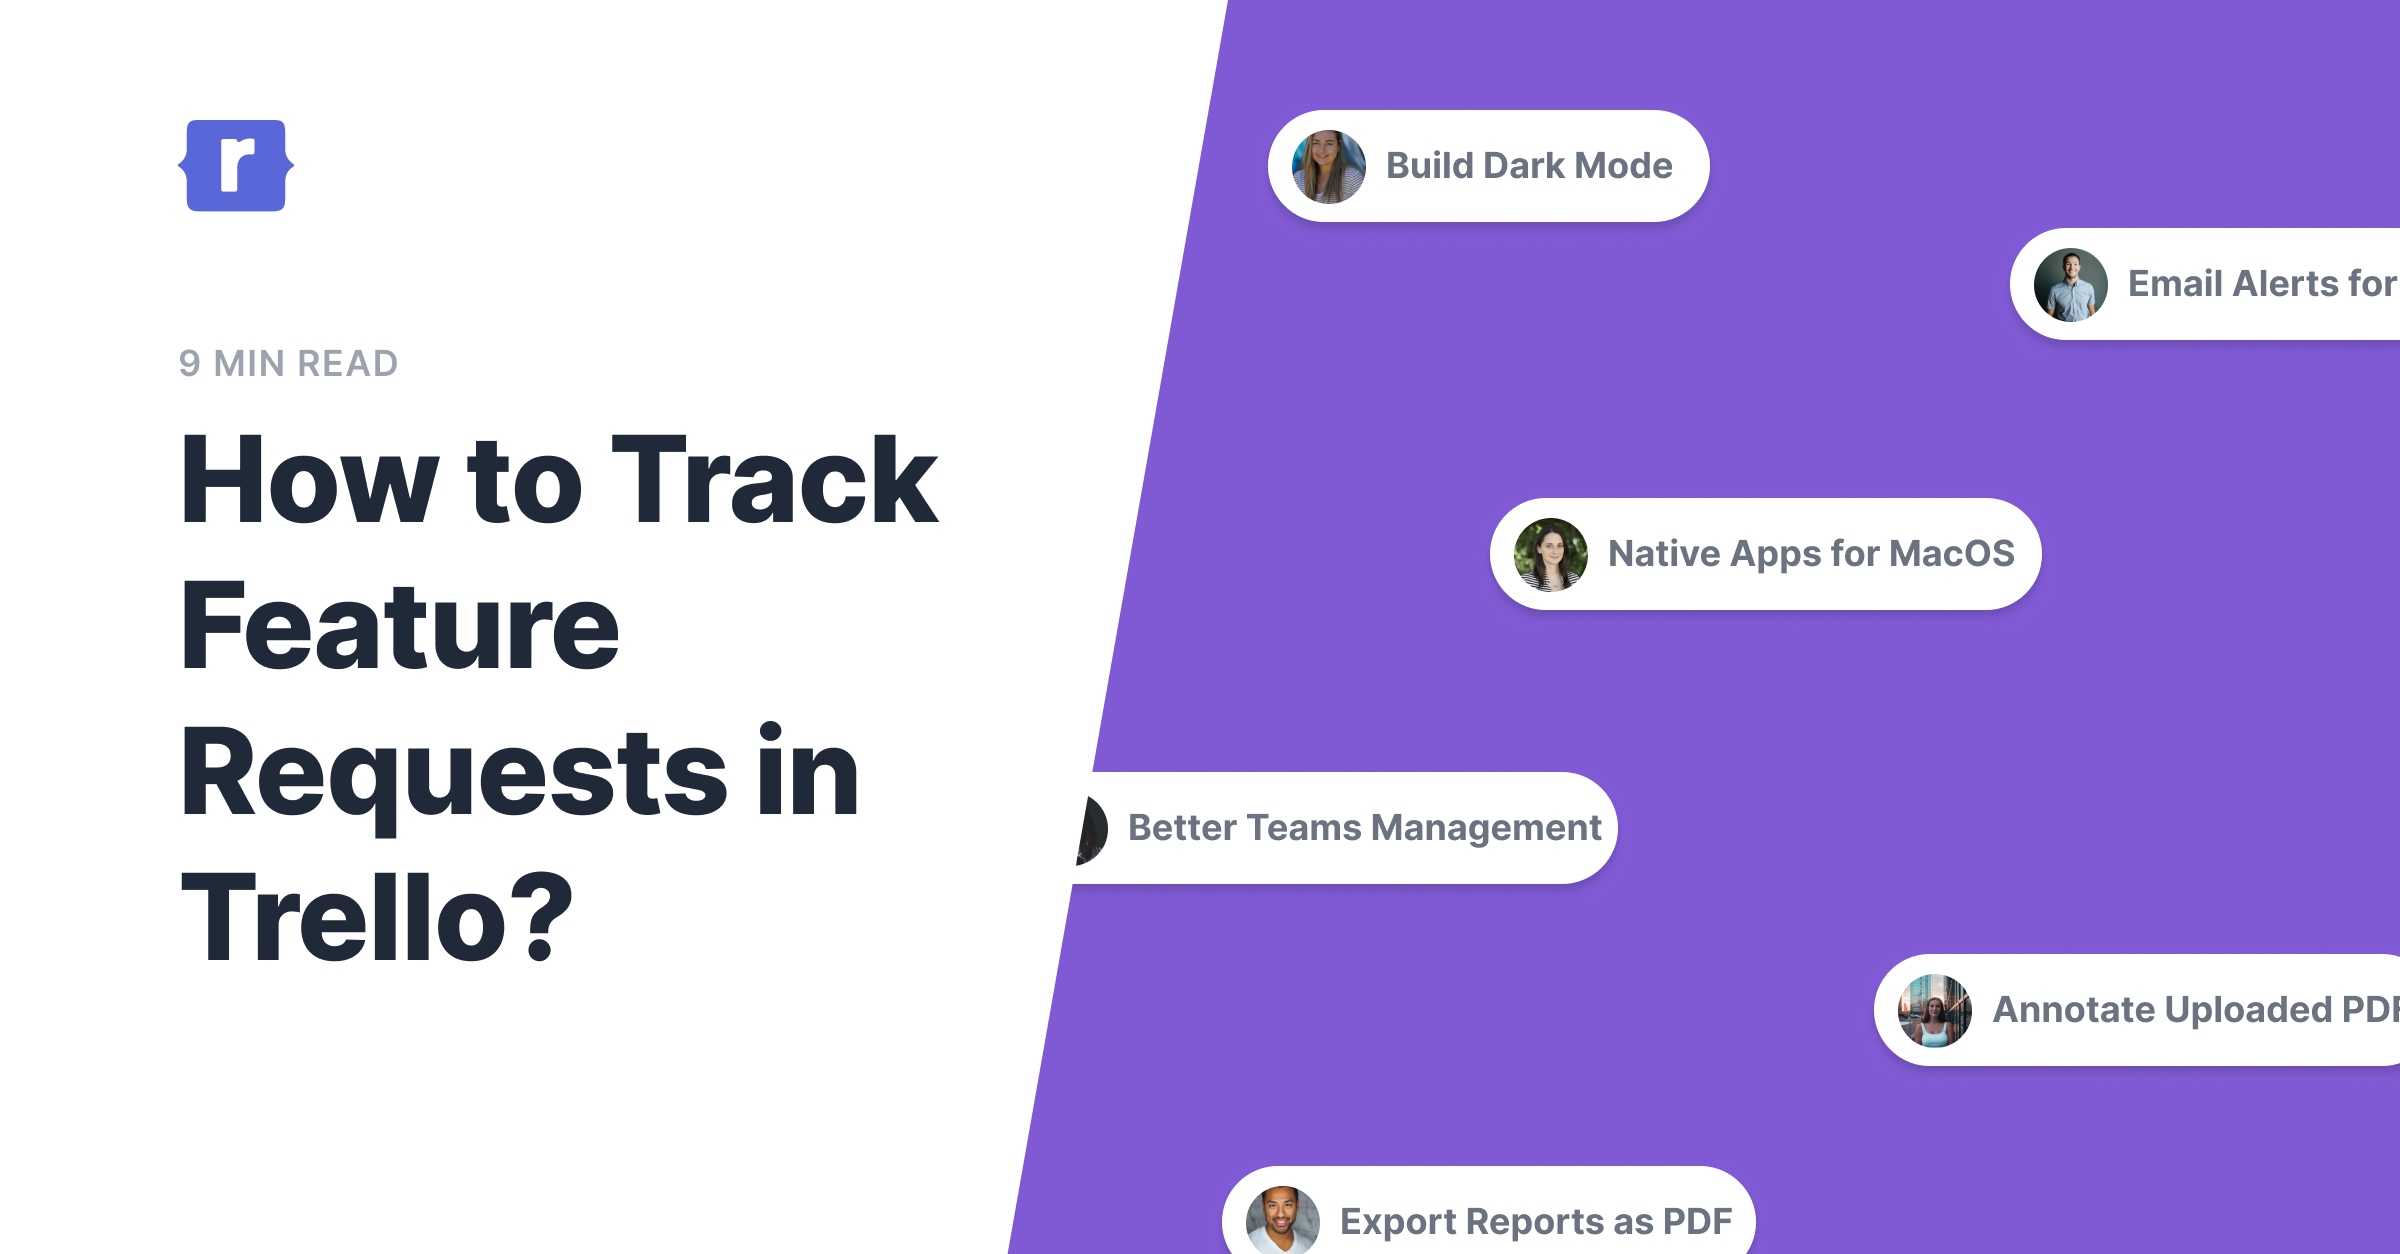 How to Track Feature Requests in Trello